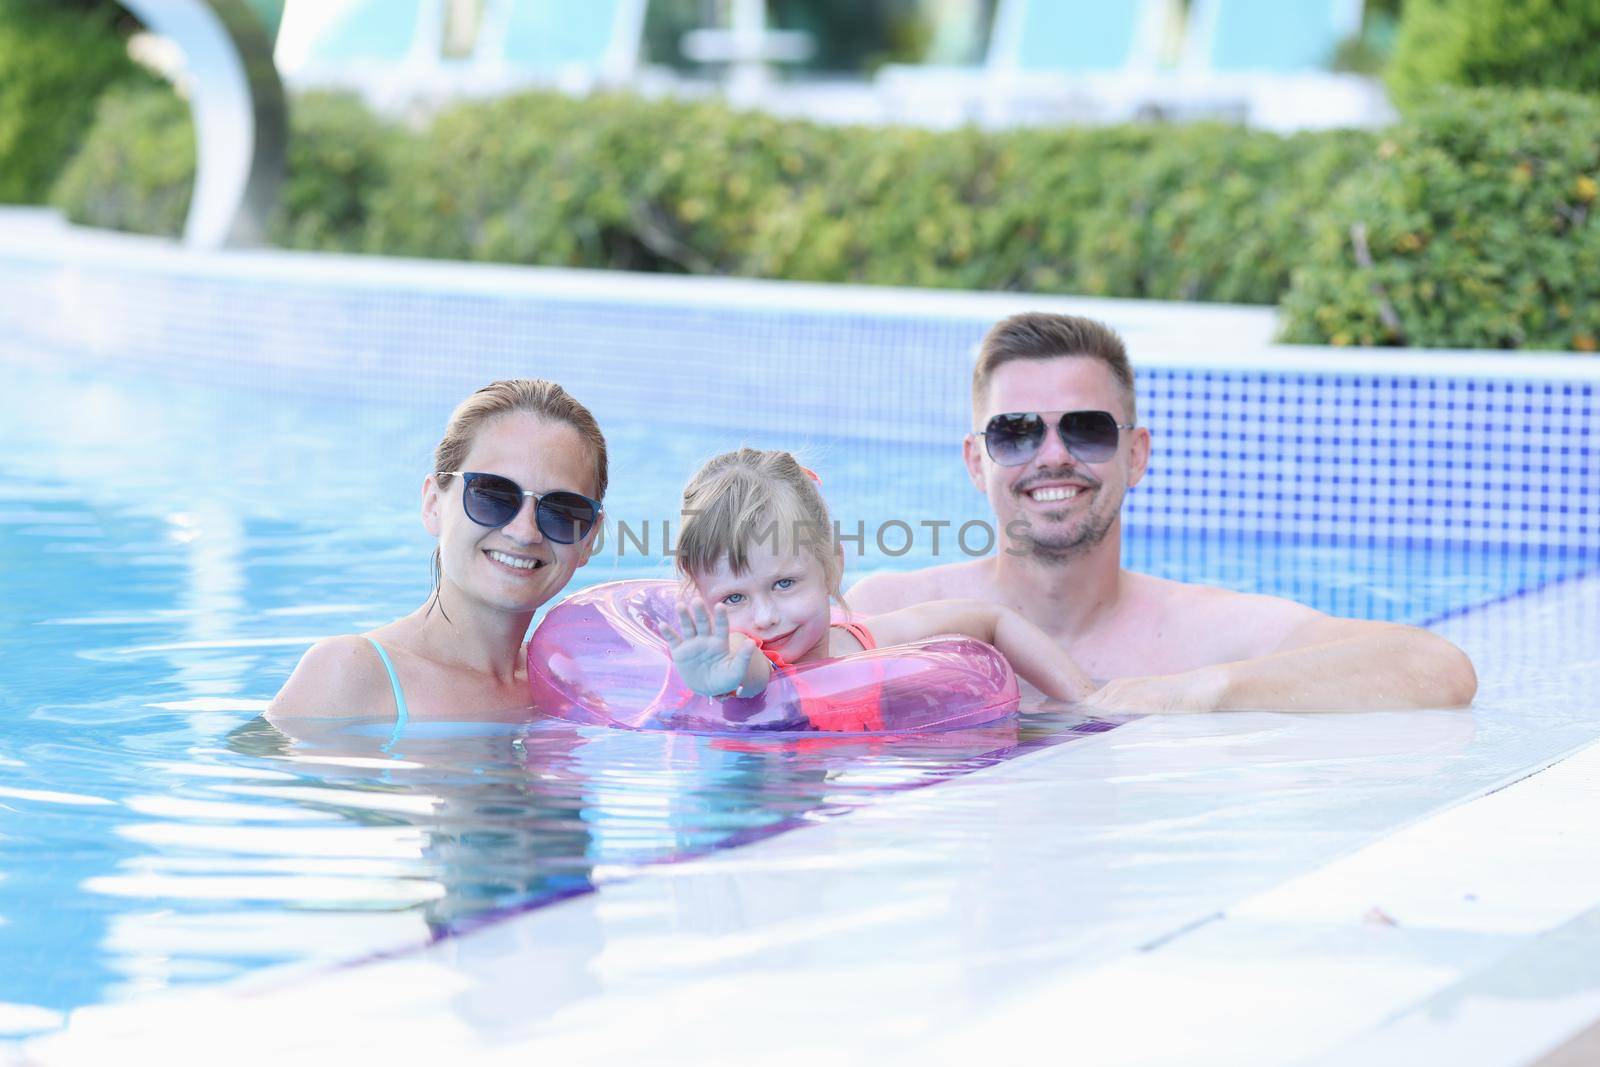 Portrait of young family with smiling child in pool. Happy joyful family together in pool